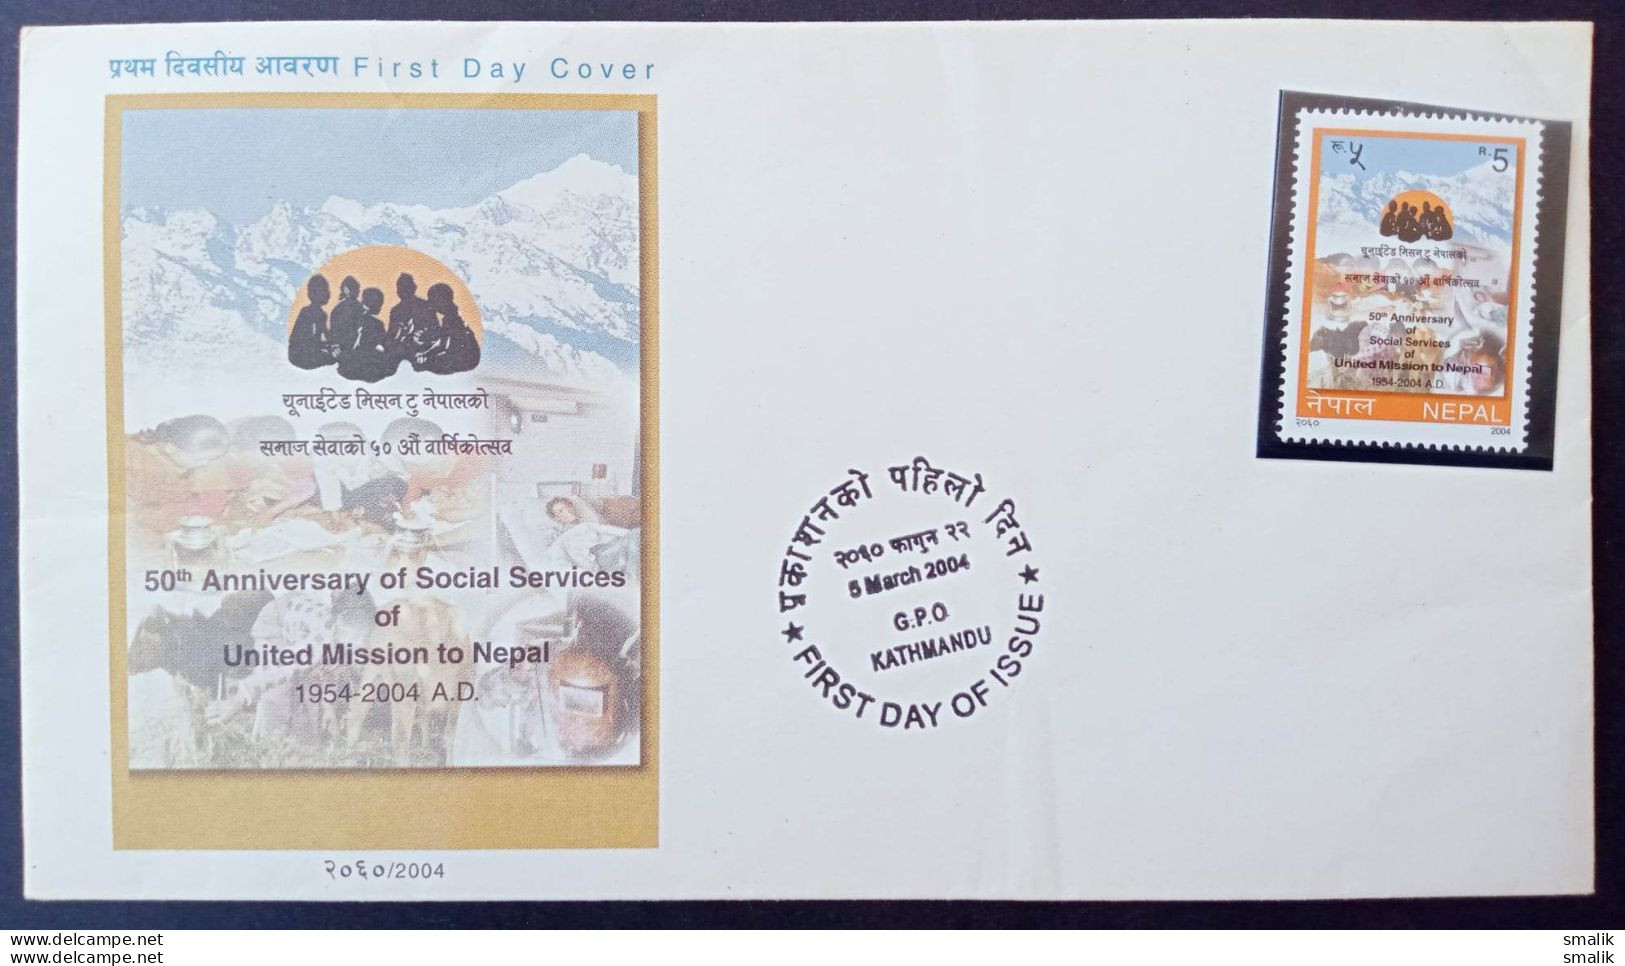 NEPAL 2004 FDC - 50th Anniversary Of Social Services Of United Mission To Nepal, First Day Cover + Leaflet Brochure - Nepal